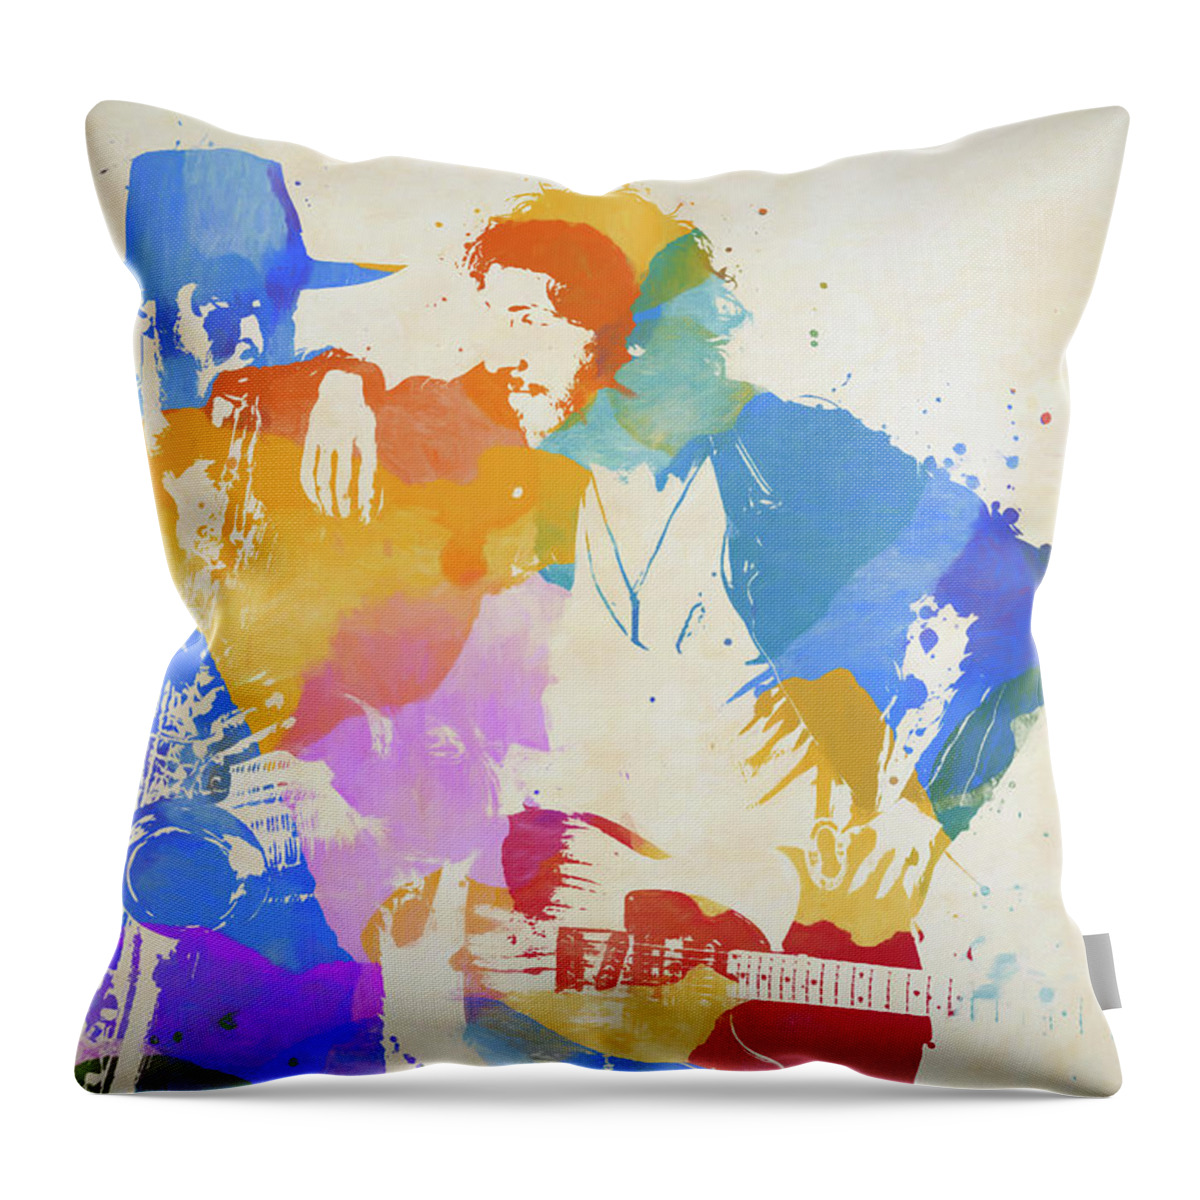 Bruce And The Big Man Throw Pillow featuring the painting Bruce And The Big Man by Dan Sproul